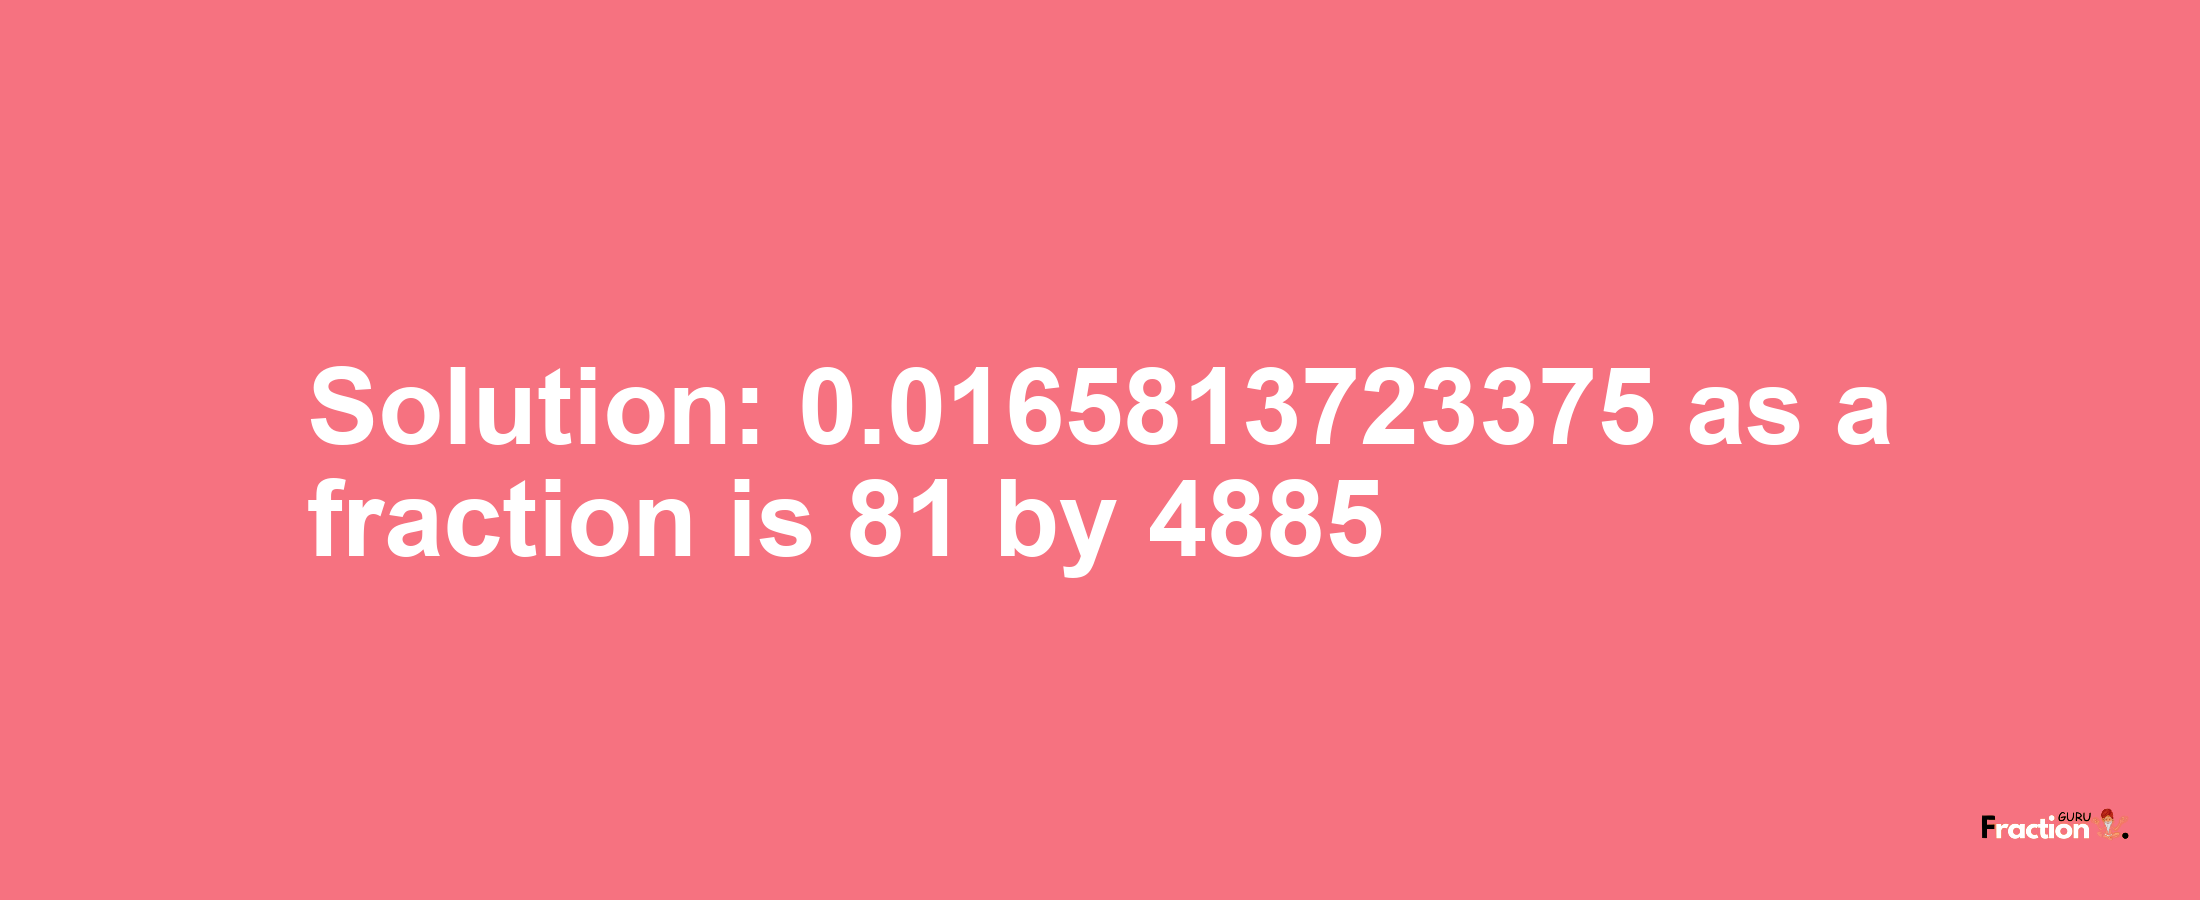 Solution:0.0165813723375 as a fraction is 81/4885